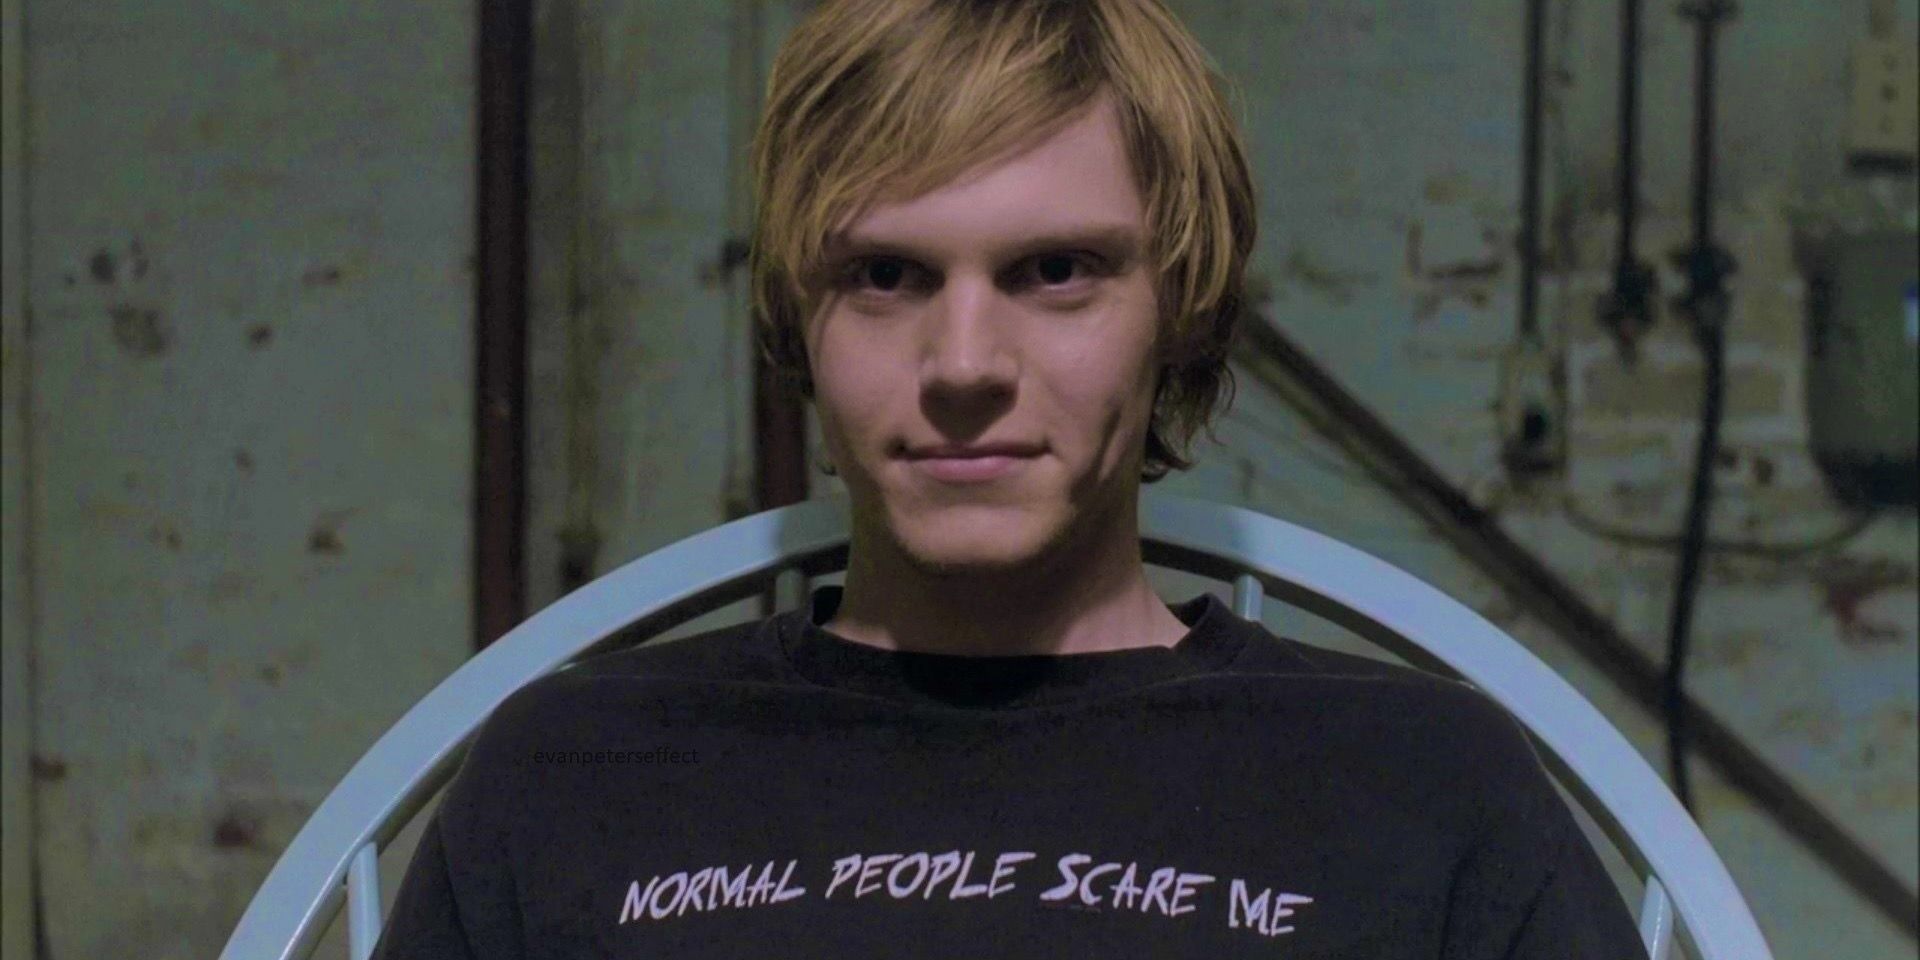 60+ Times American Horror Story Scarred You For Life